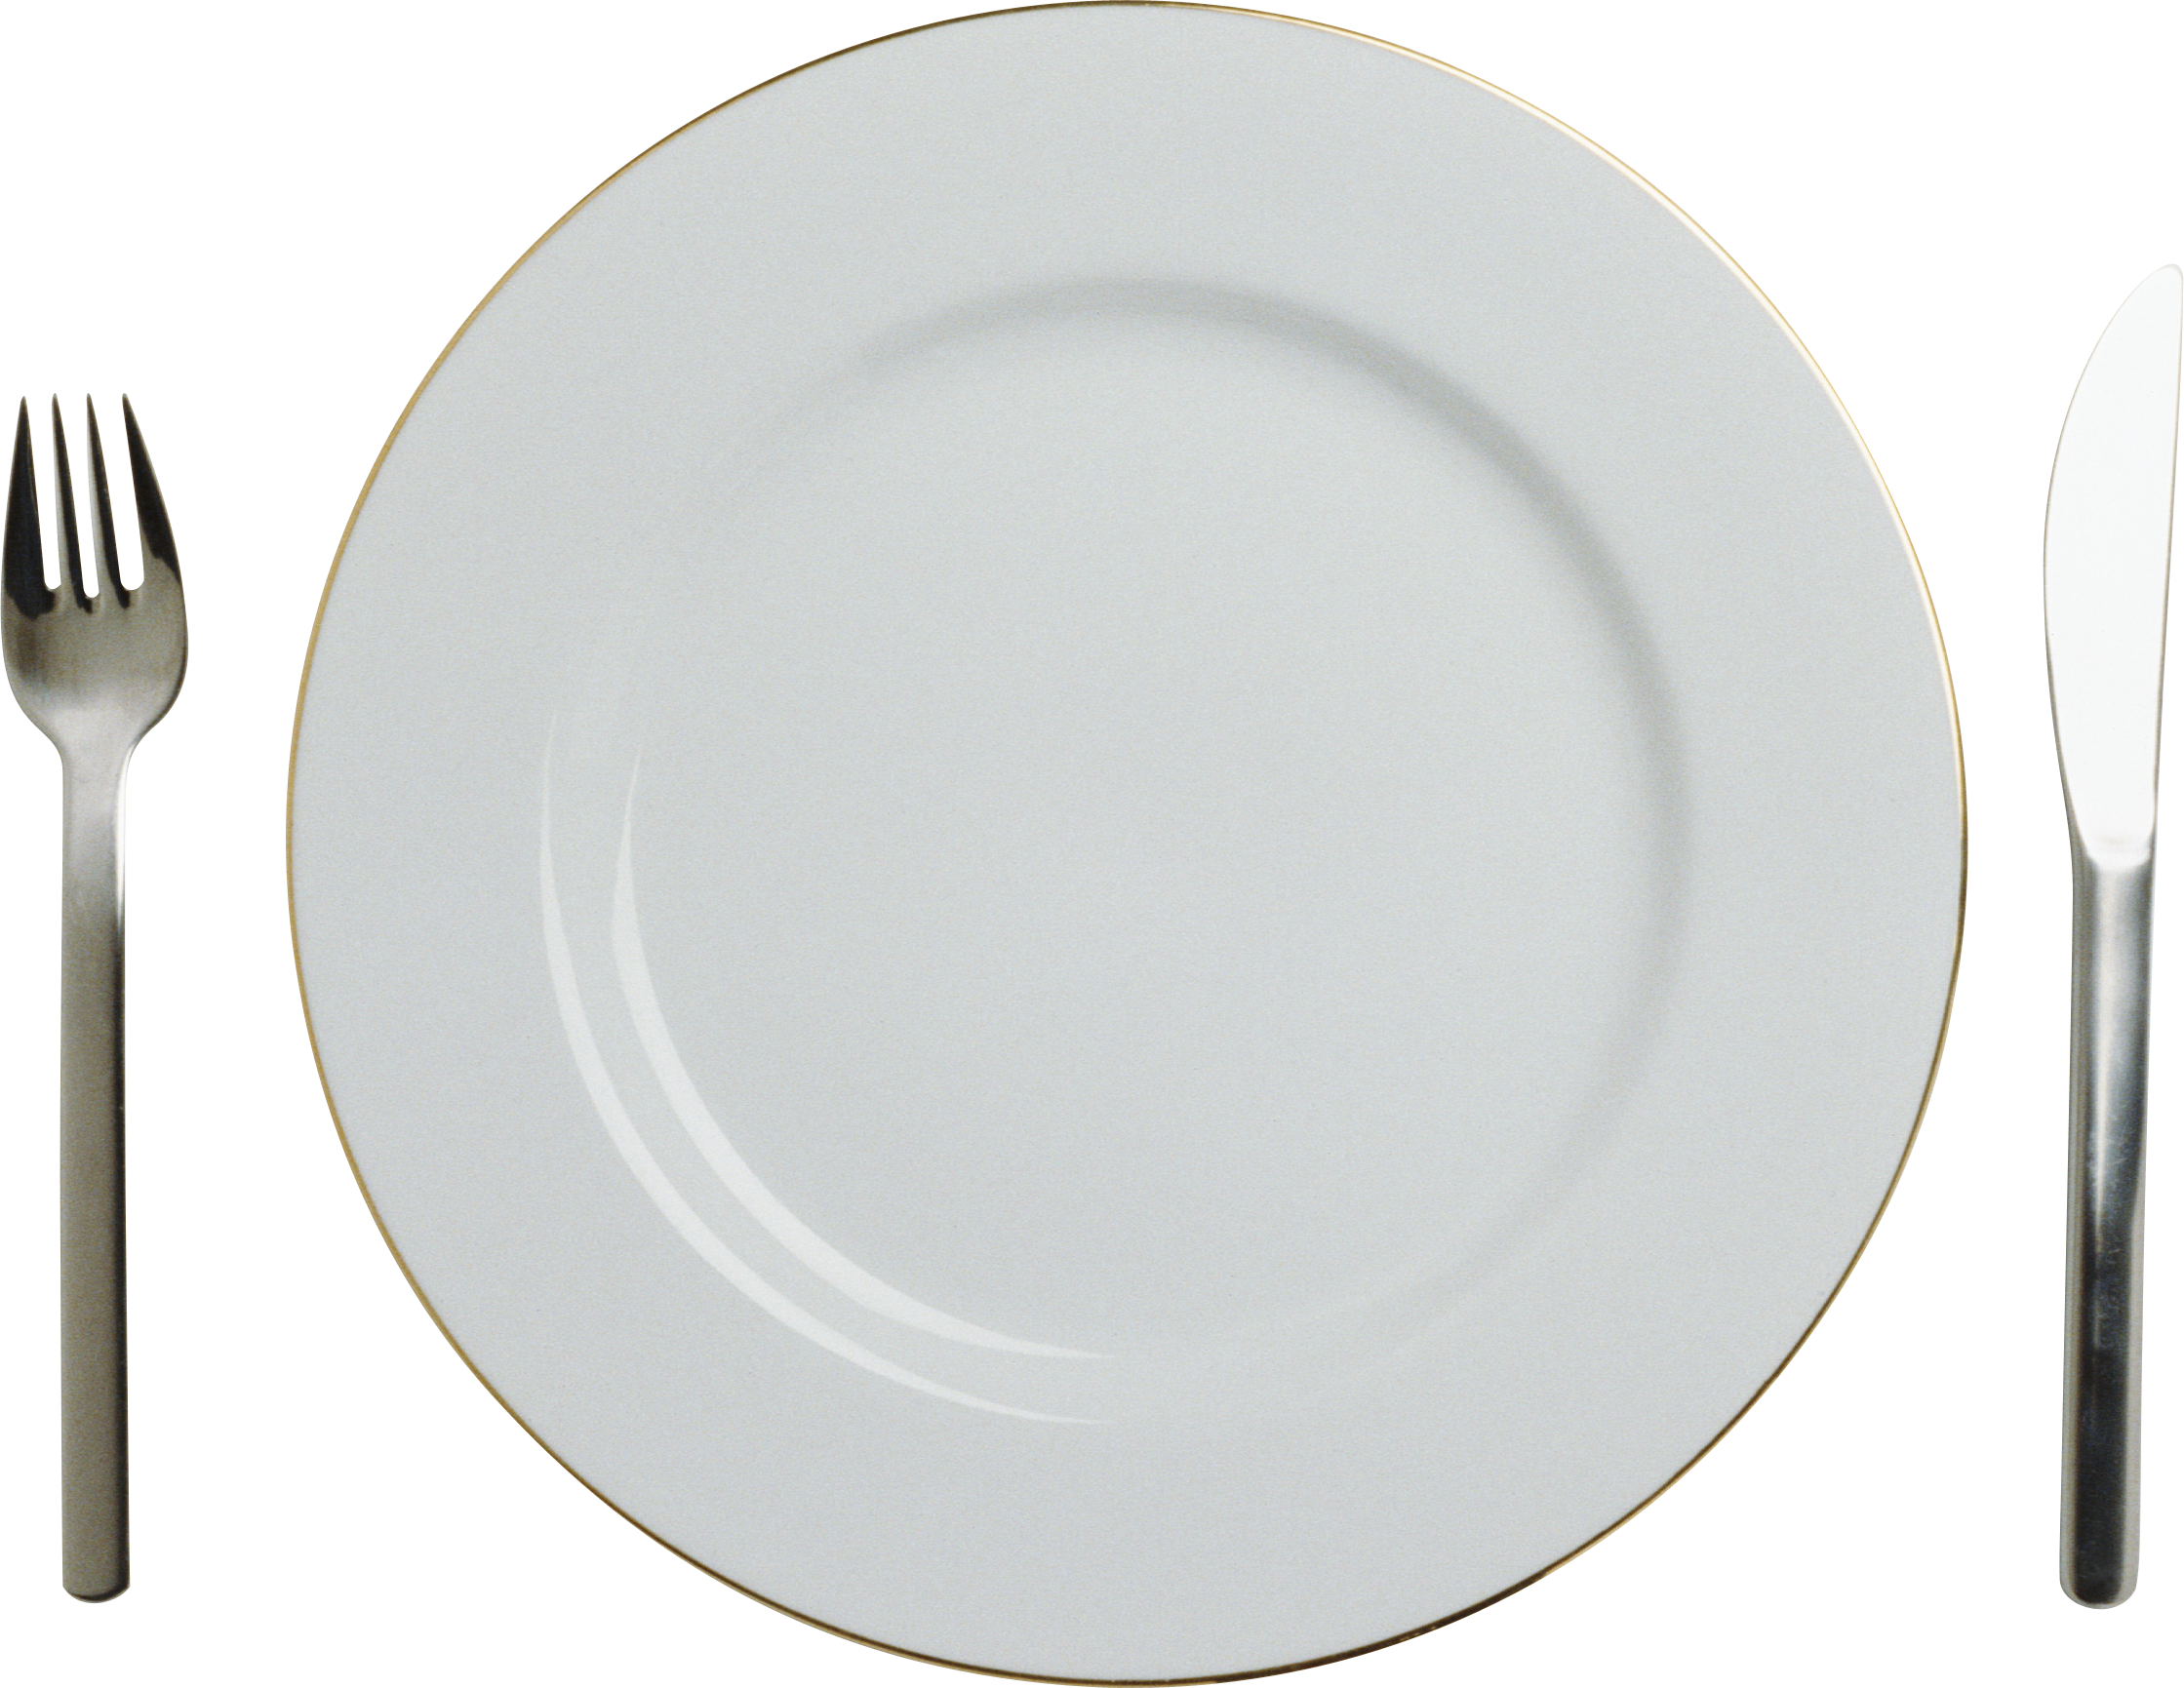 Plate.png